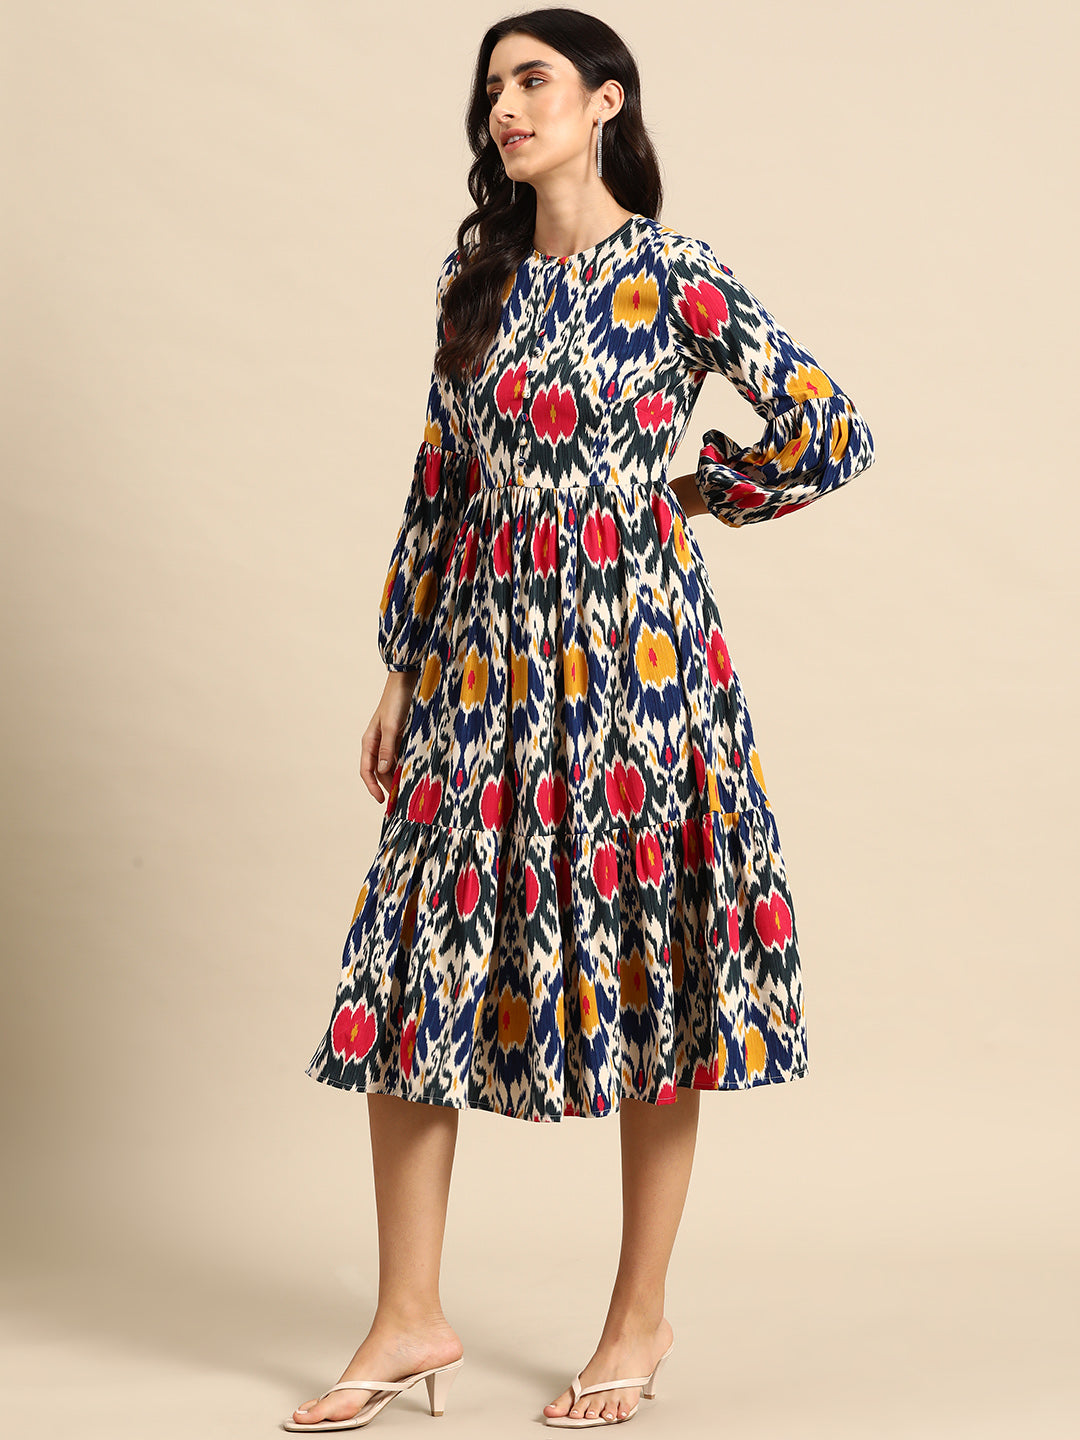 Midi Layered dress with balloon sleeve in Blue and Pink Ikkat Print